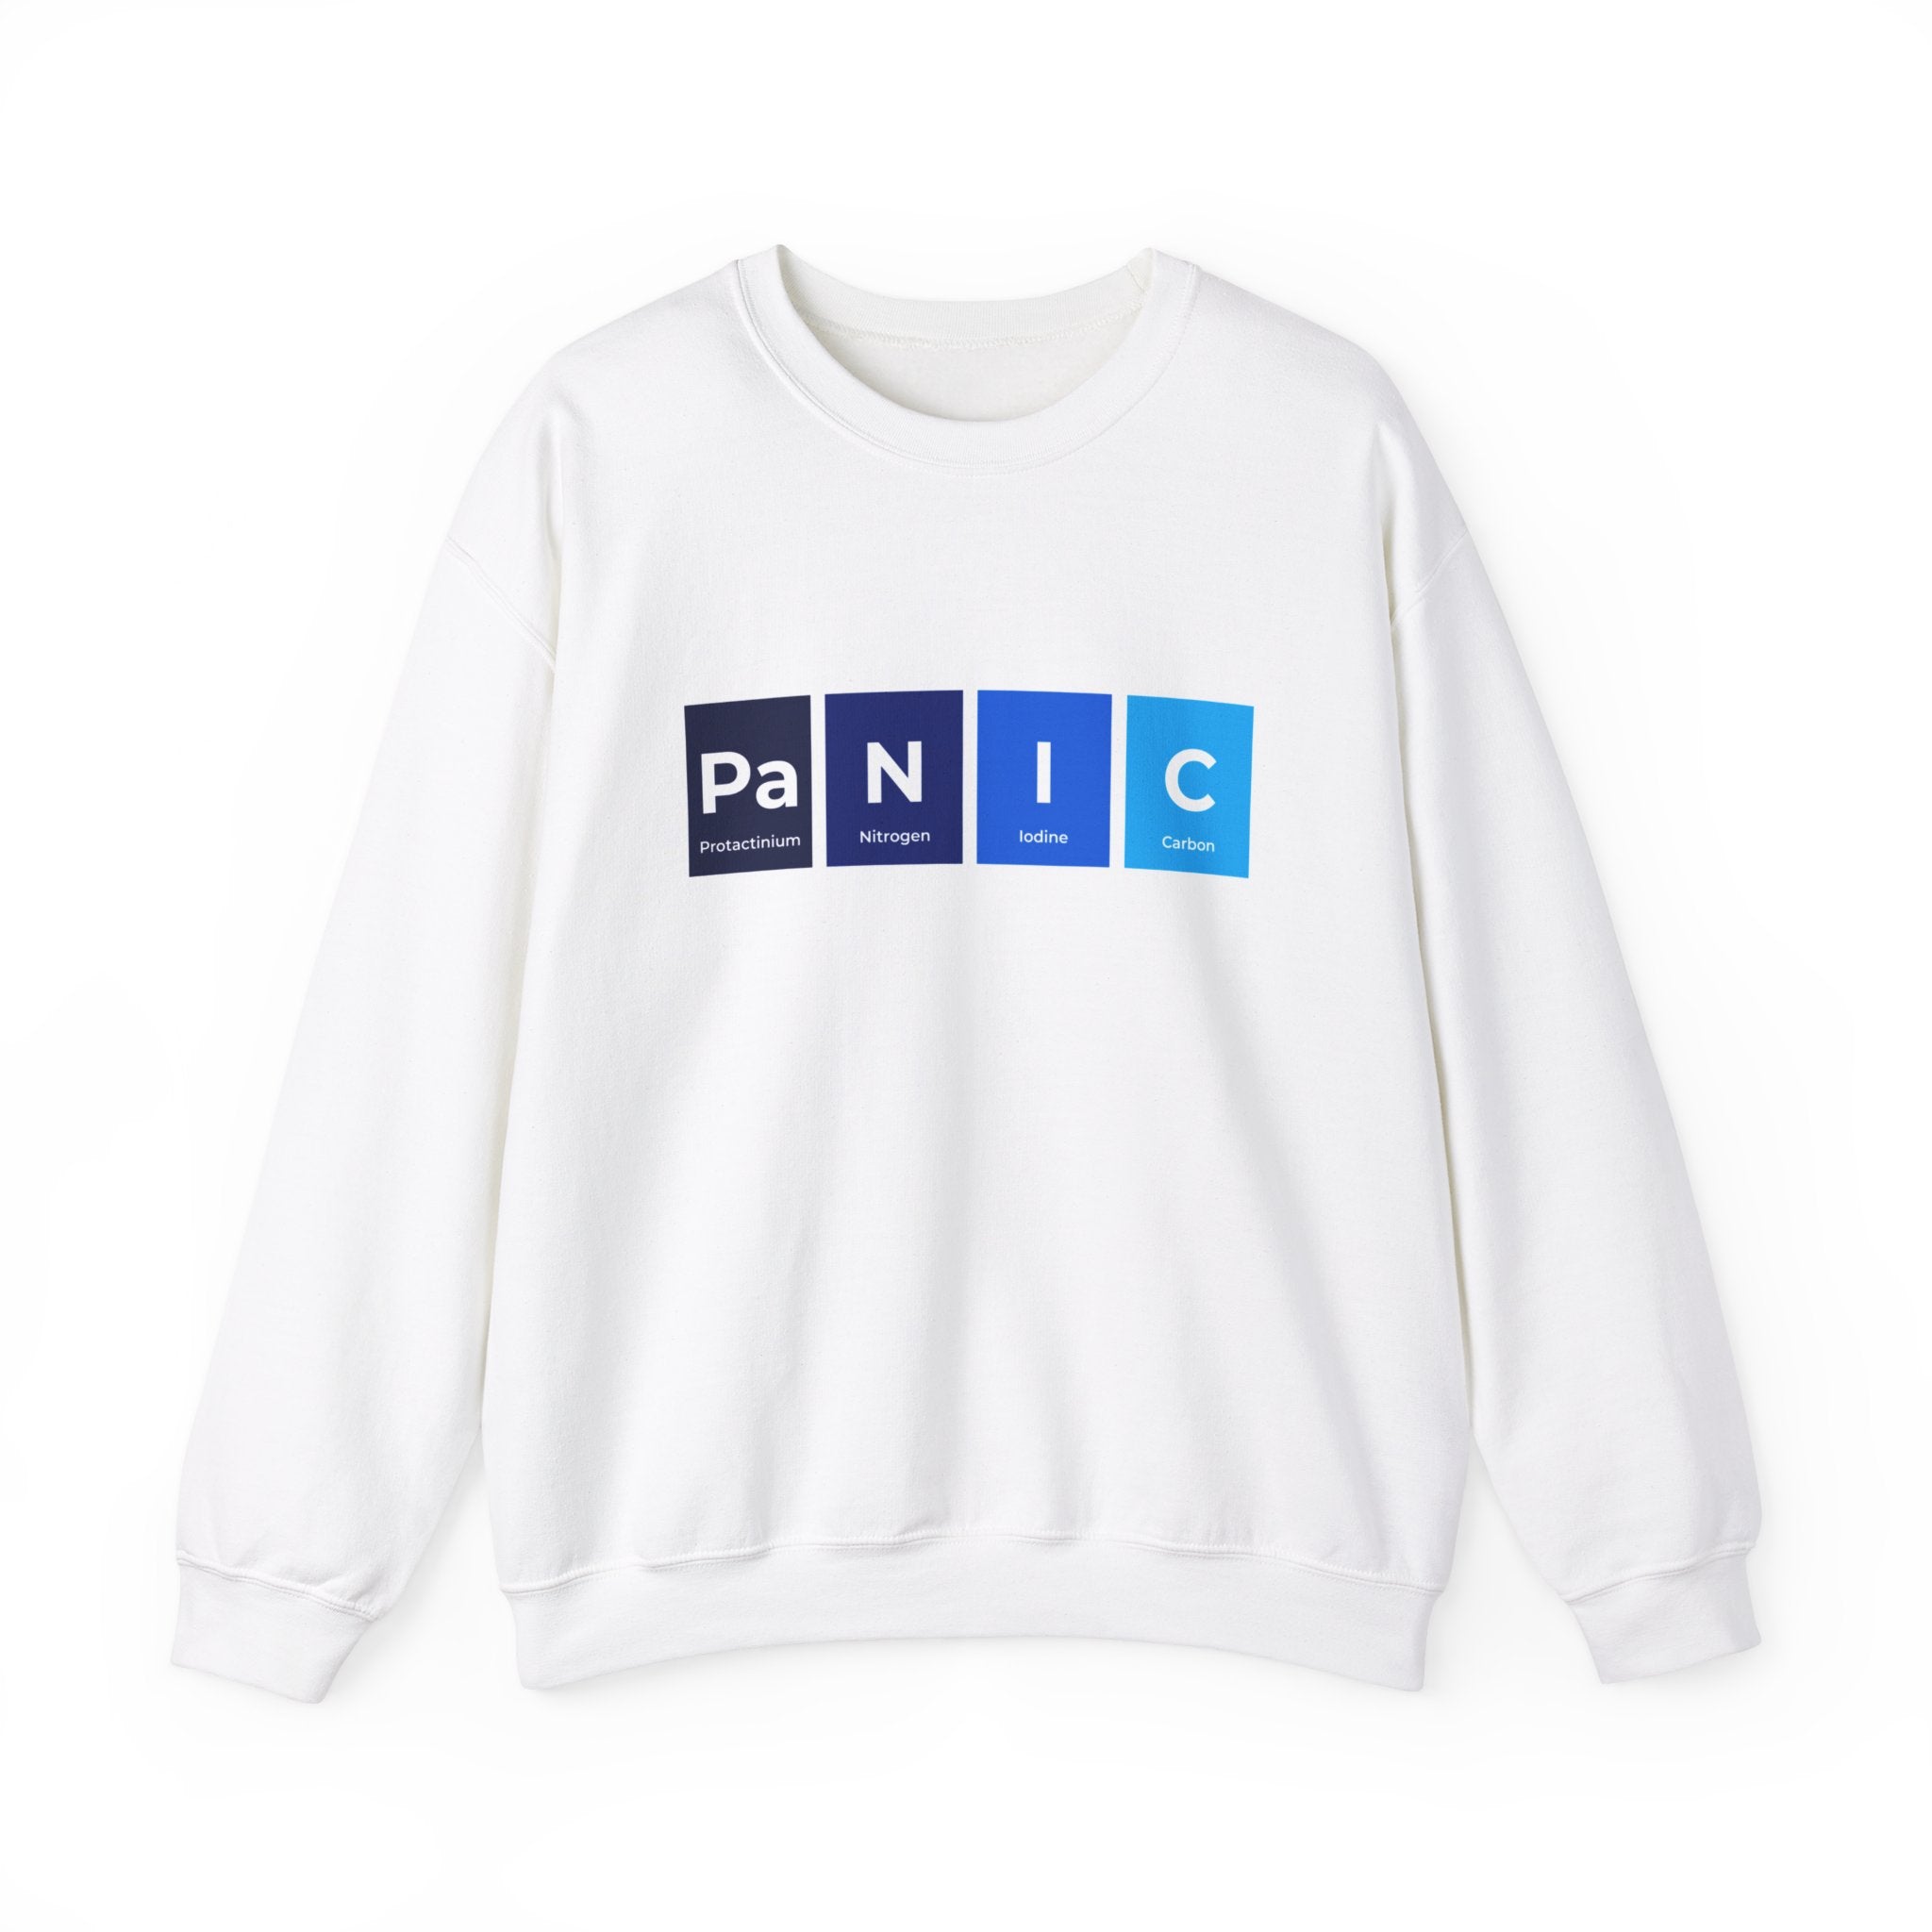 Cozy white Pa-N-I-C - Sweatshirt featuring the word "PANIC" in periodic table style blocks, with each letter representing an element: Phosphorus, Nitrogen, Iodine, Carbon. Perfect for the colder months.